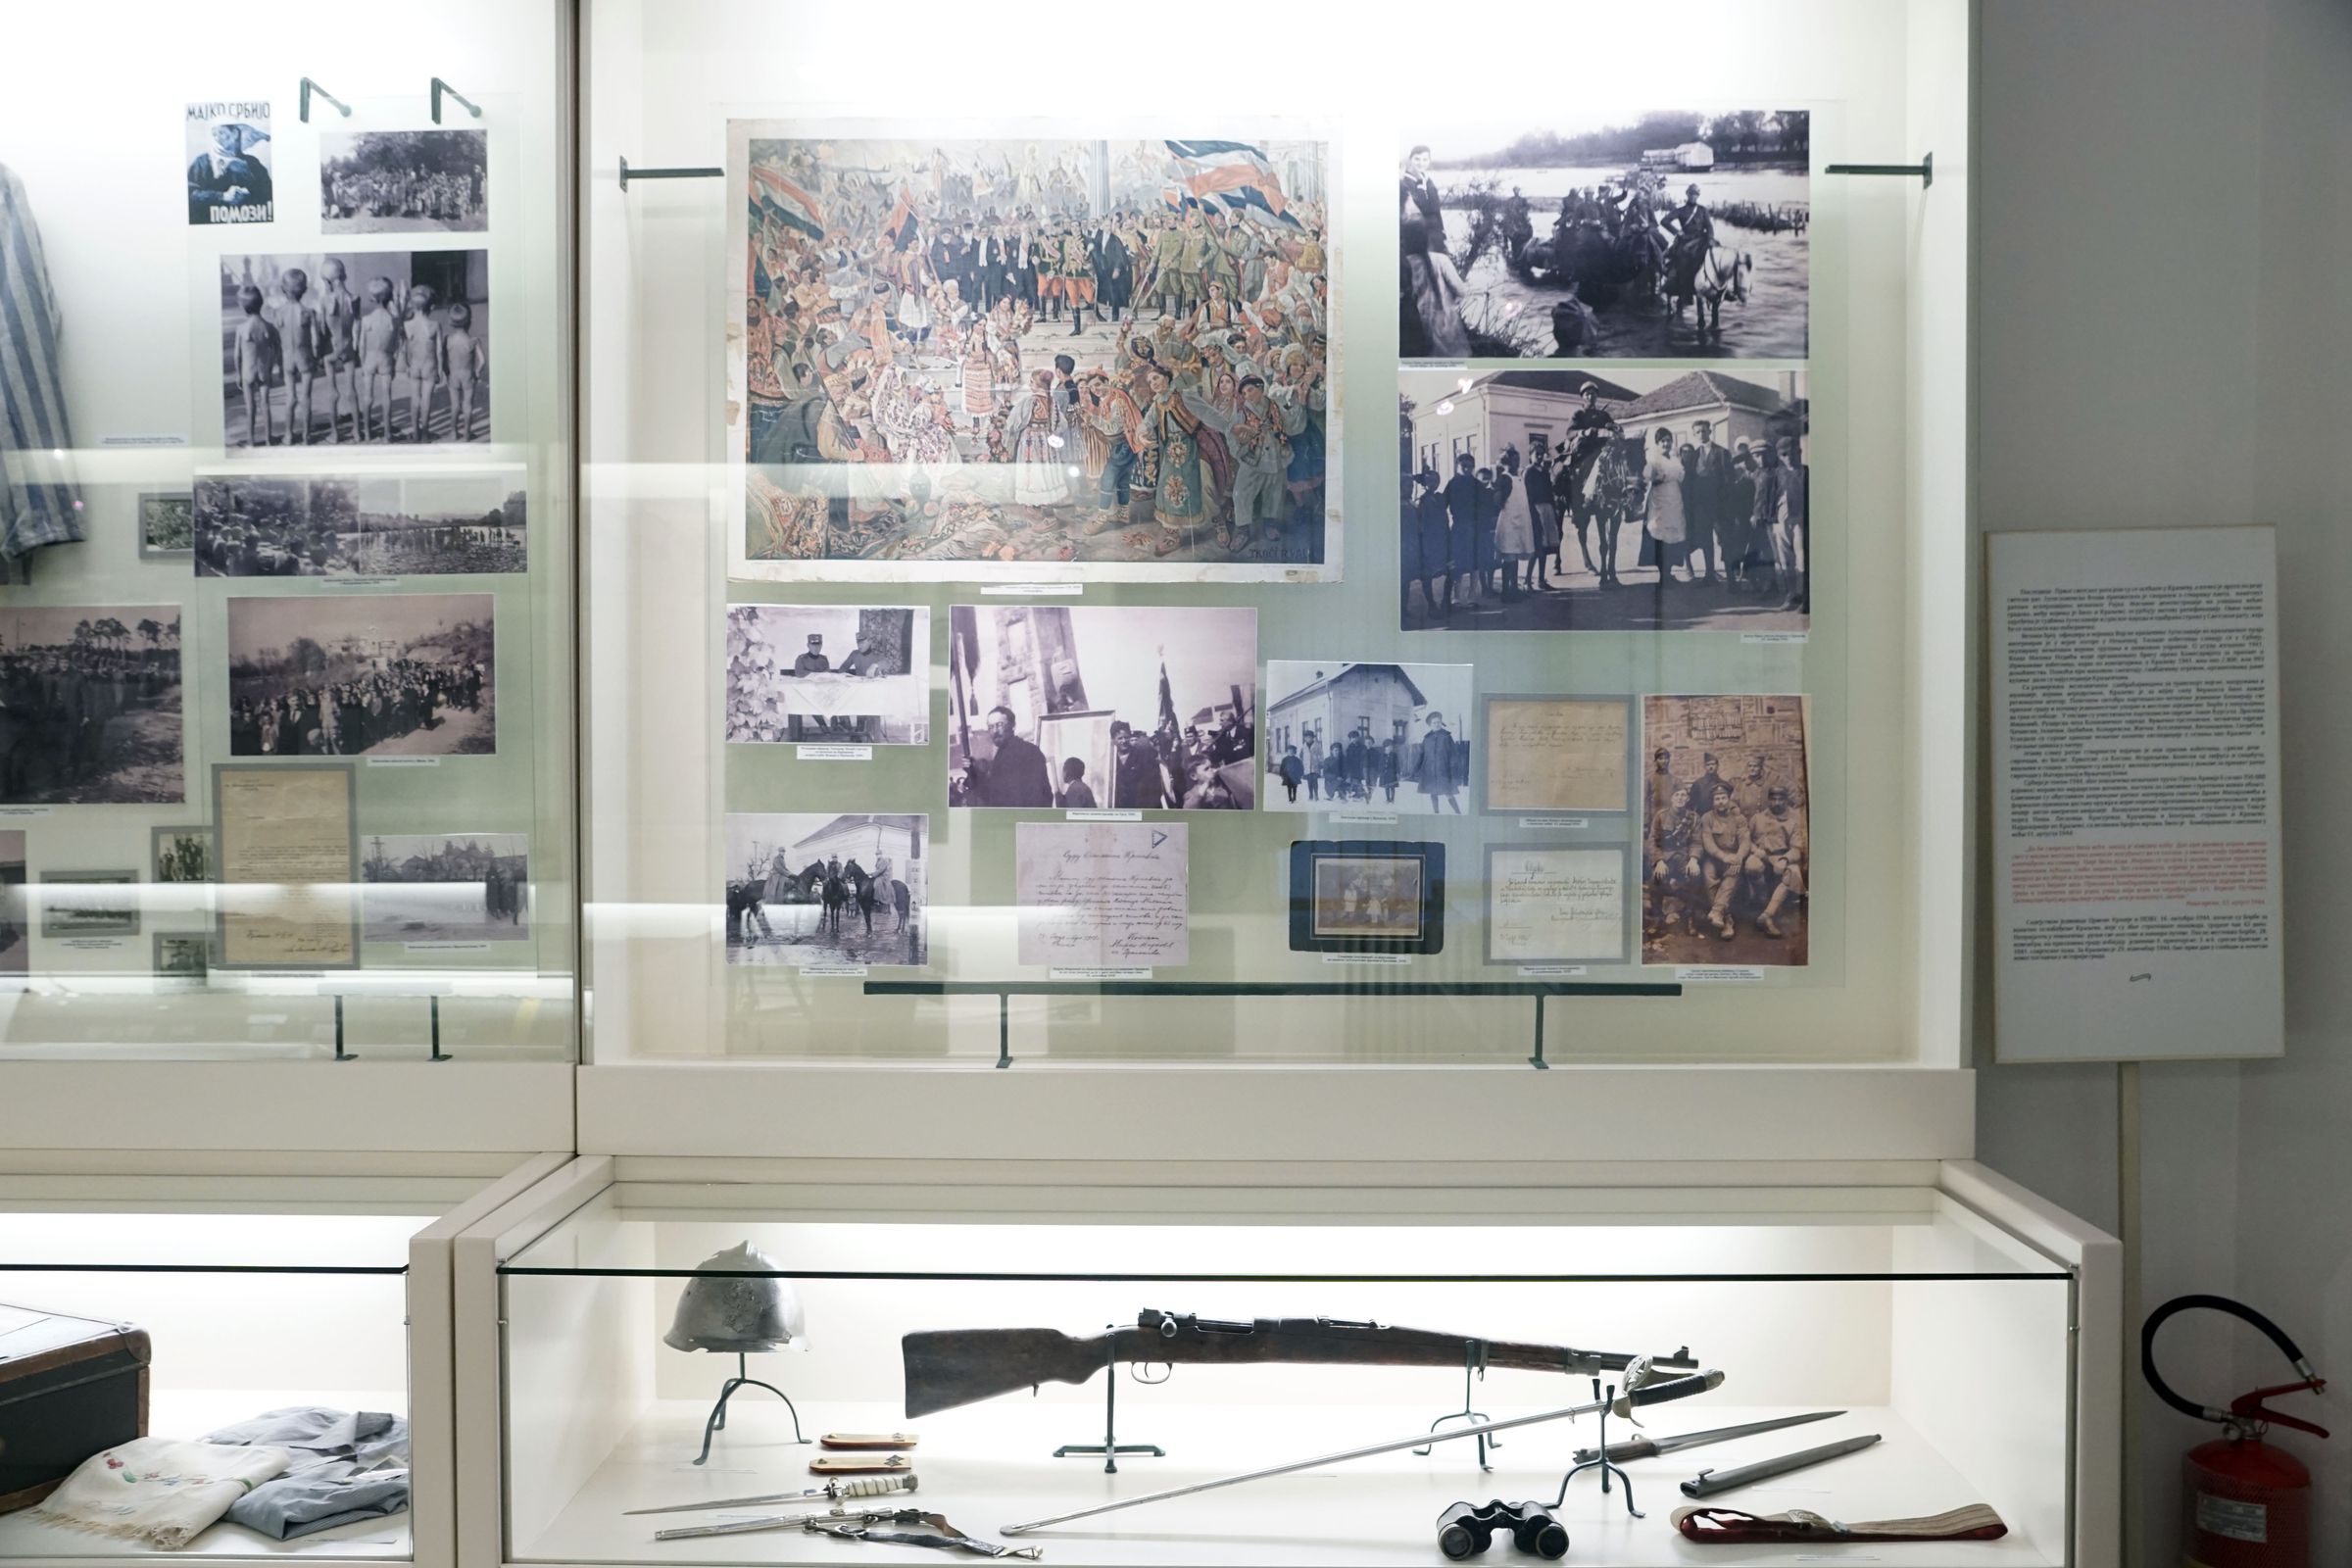 Display cases dedicated to the Unification of the Kingdom of Yugoslavia and the armament of this period